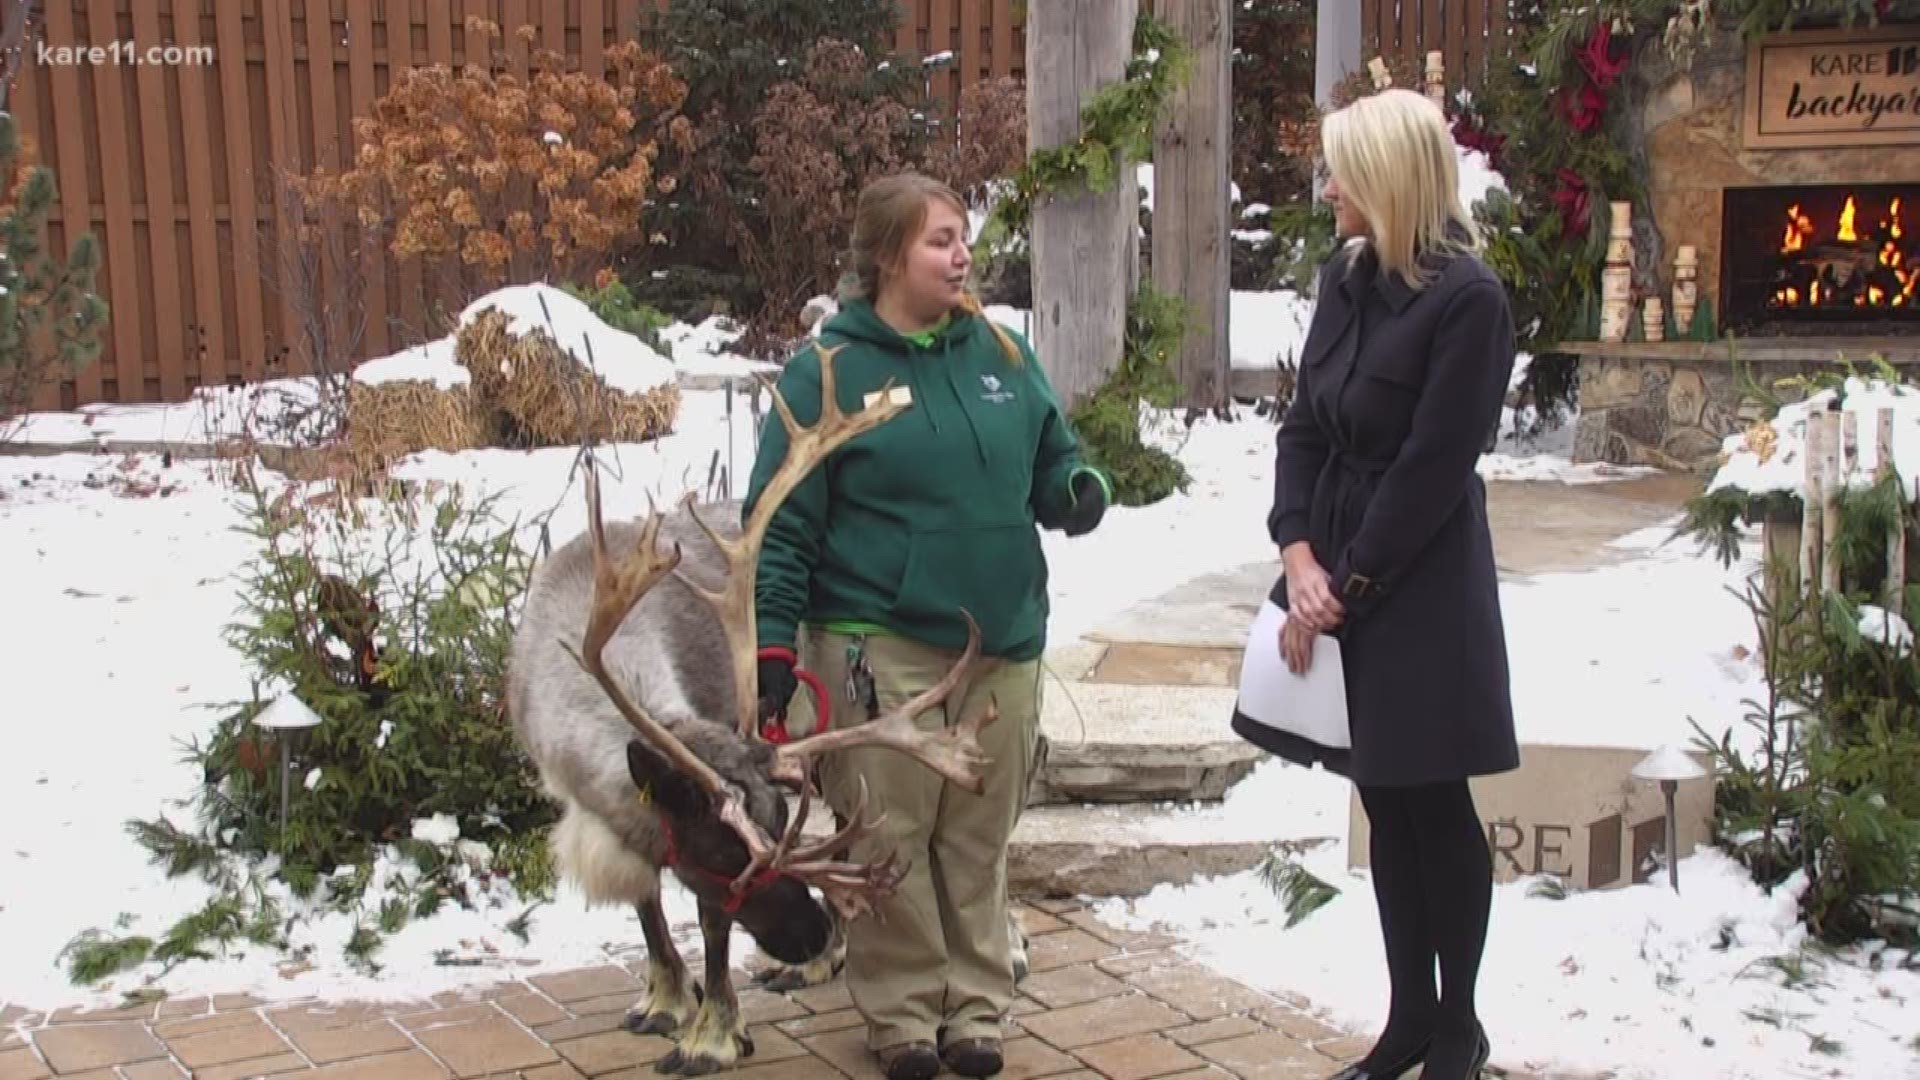 The Minnesota Zoo is offering new behind the scenes experiences to get an inside look into the animal's habitats.